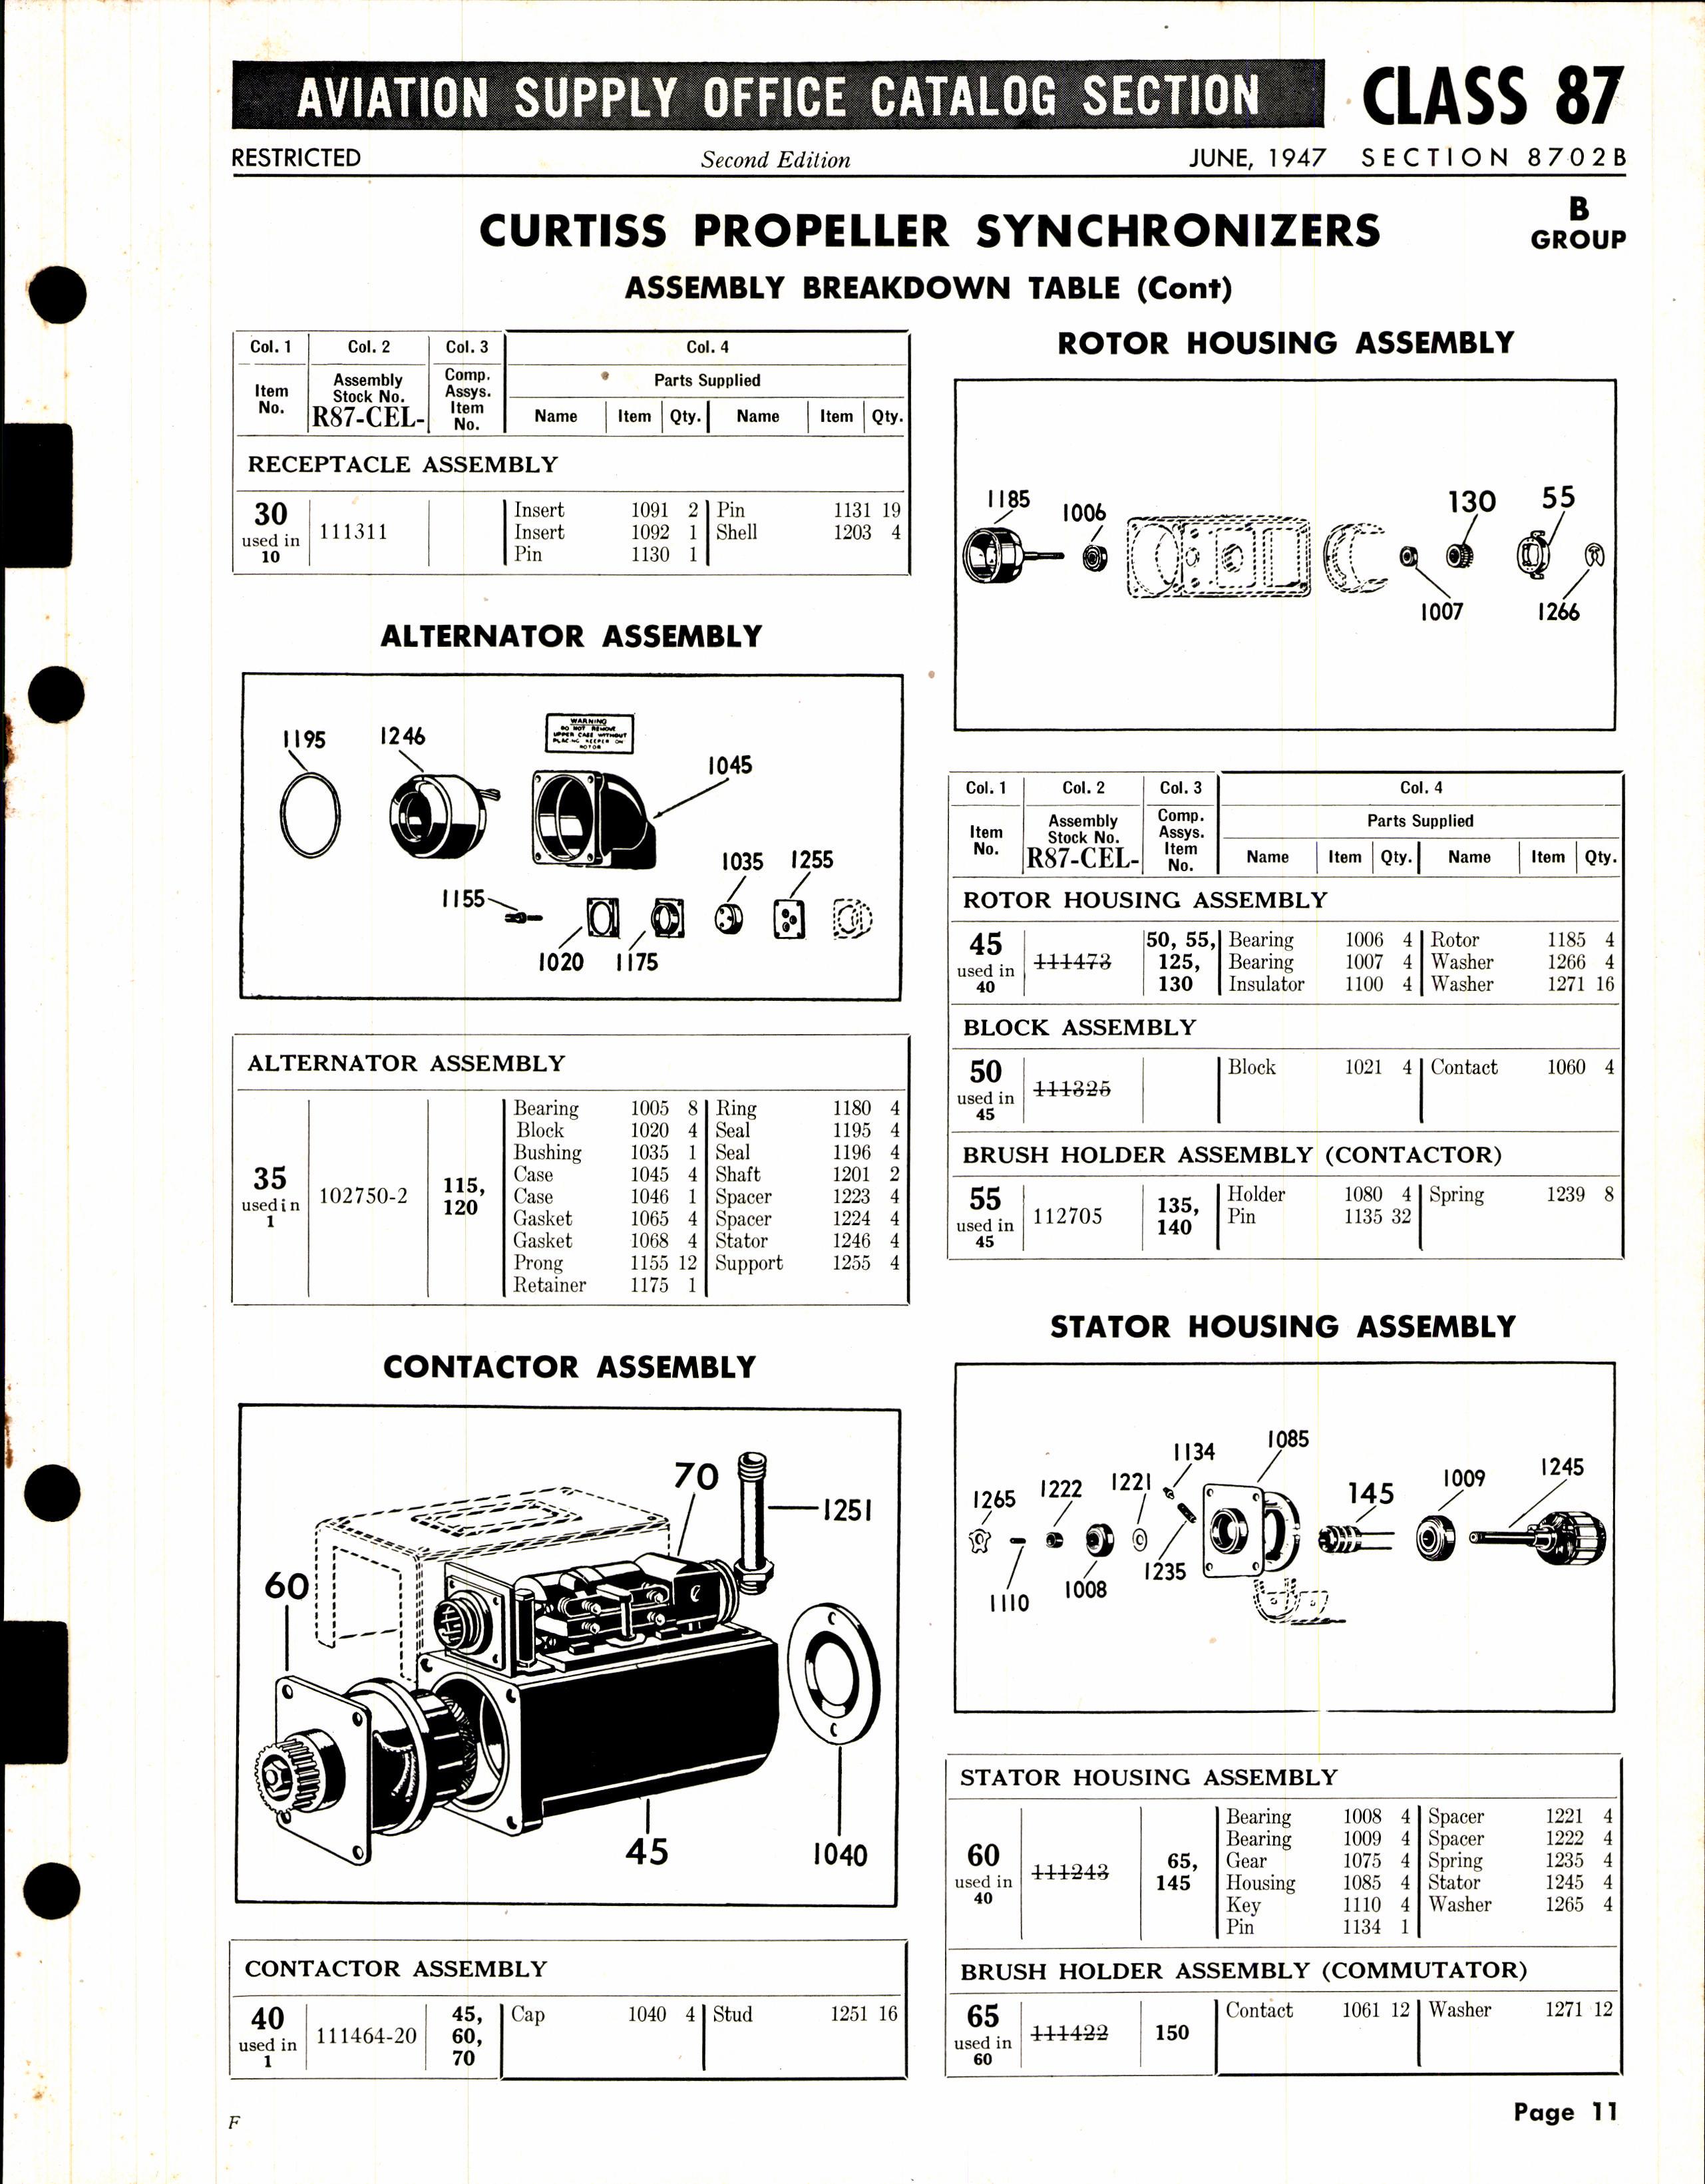 Sample page 11 from AirCorps Library document: Curtiss Propeller Controls